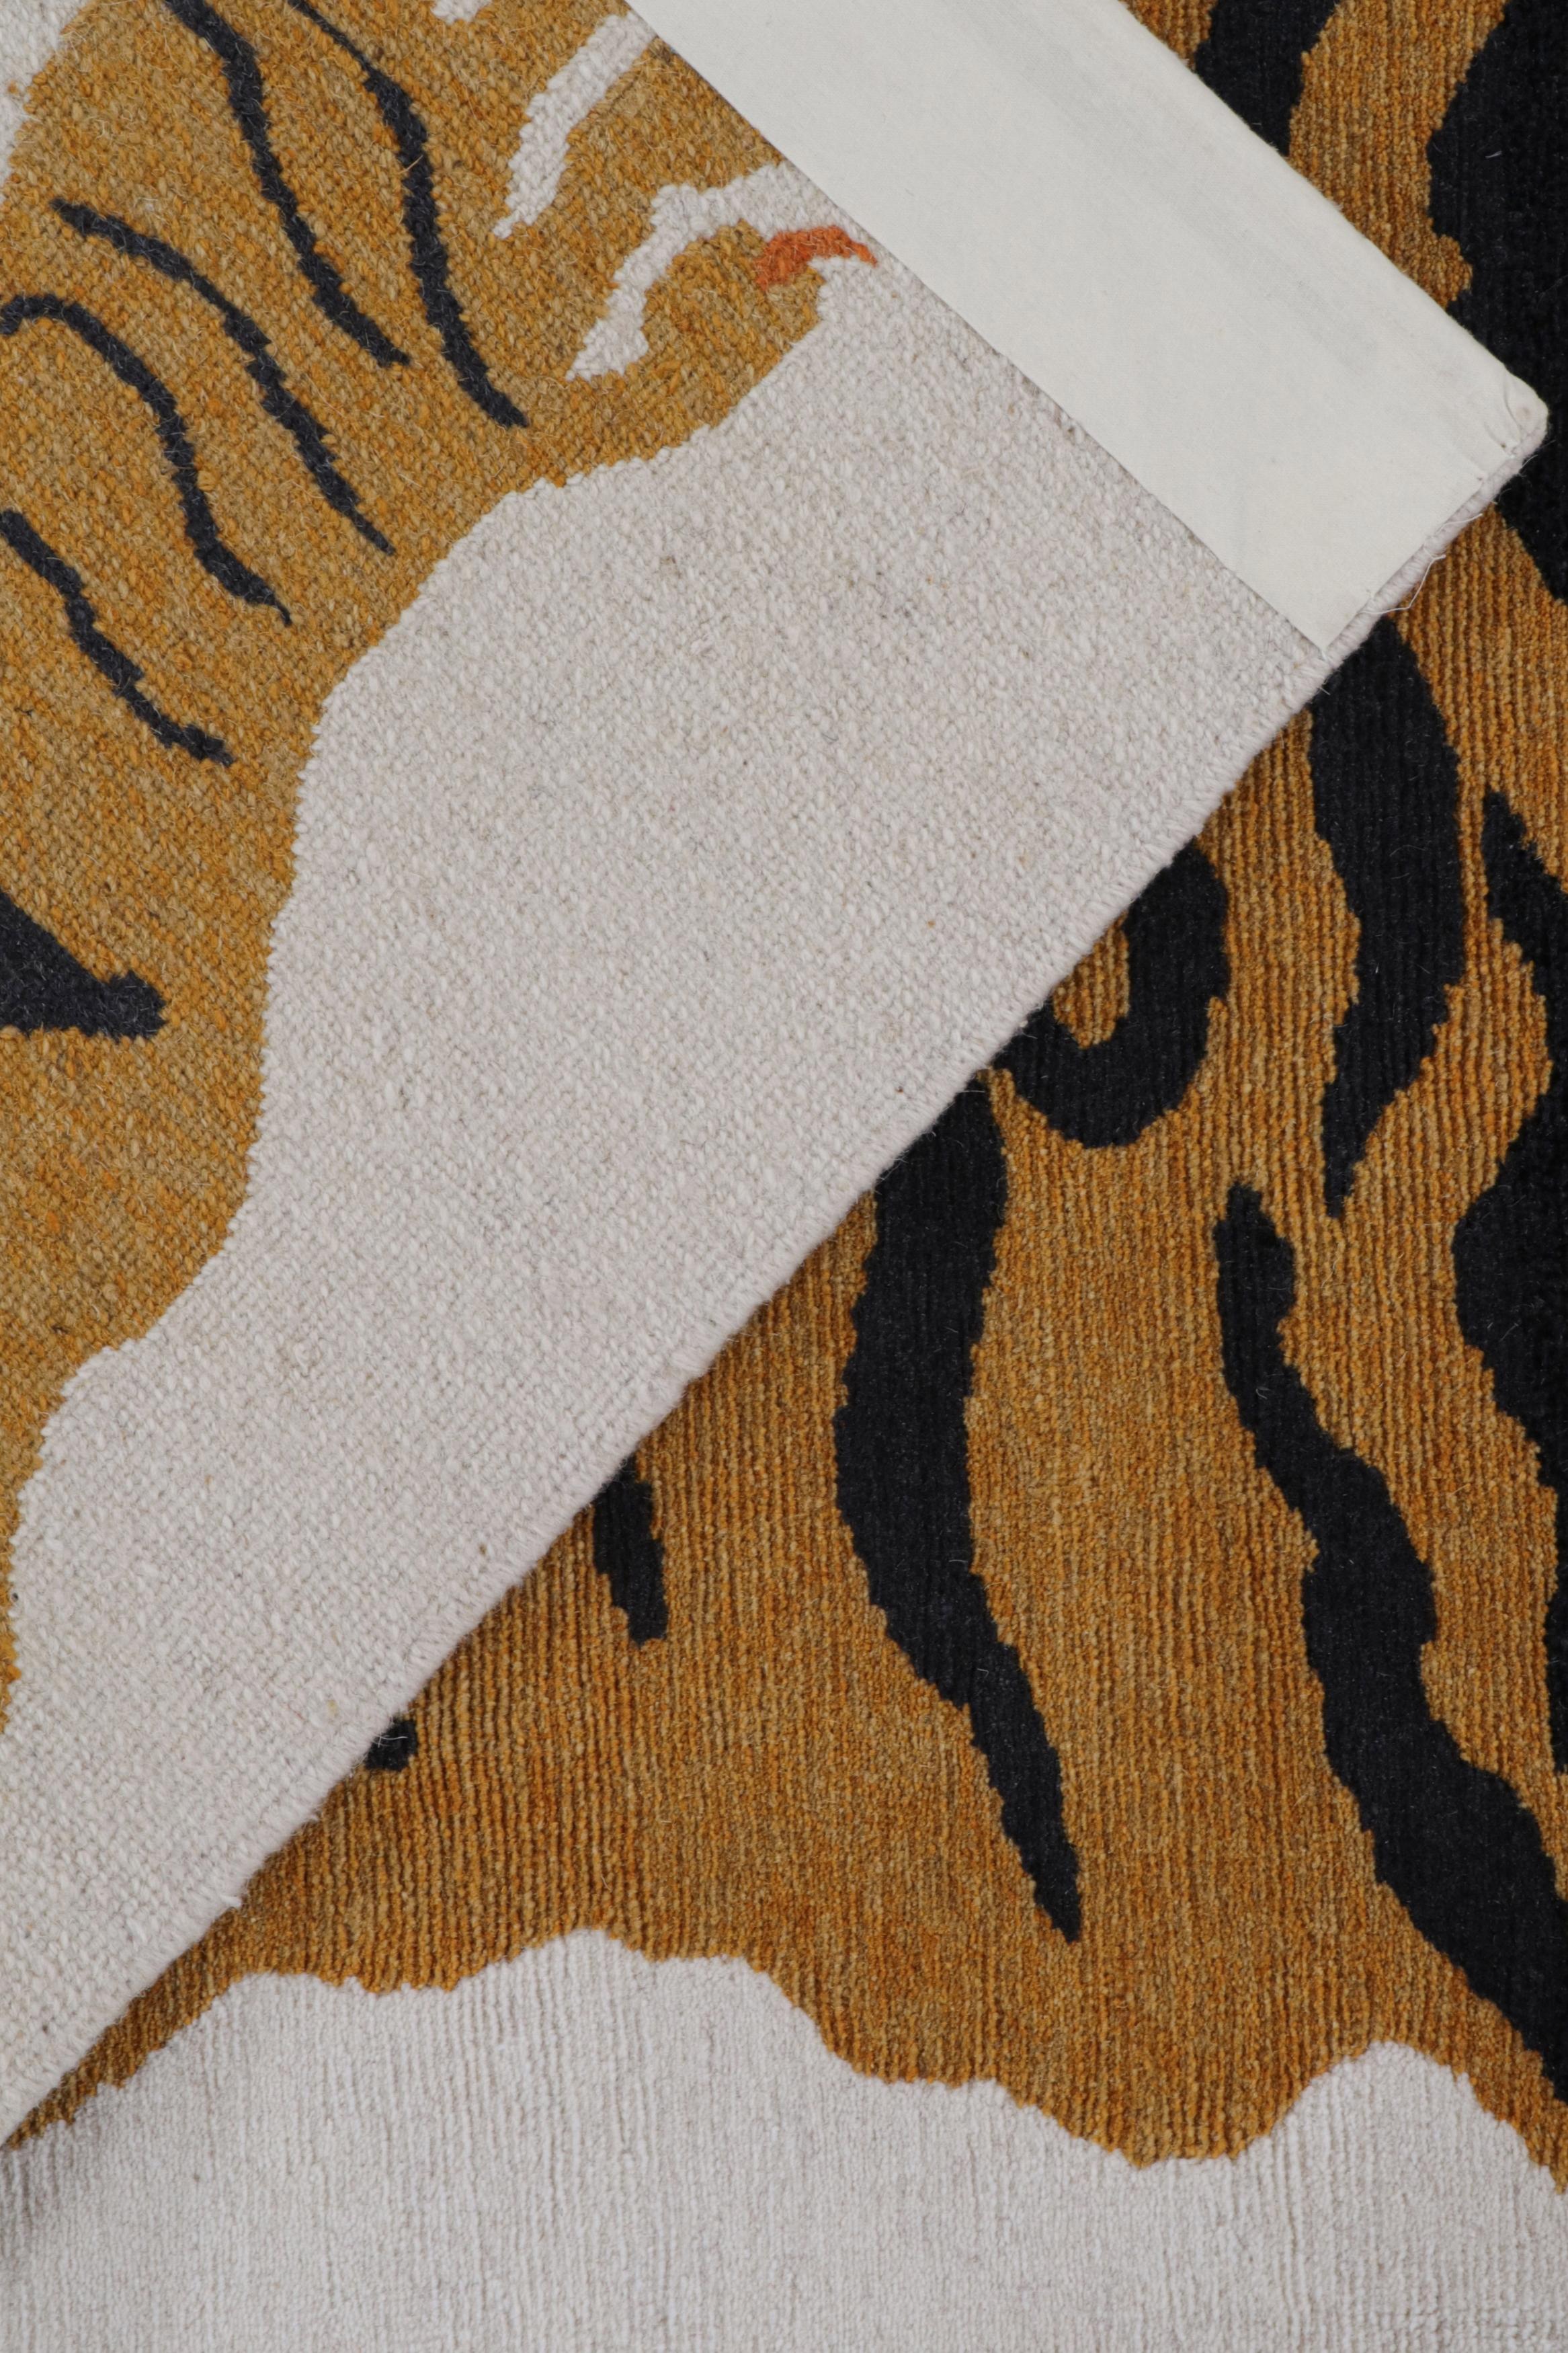 Wool Rug & Kilim’s Tiger-Skin Rug in White with Gold & Black Pictorial For Sale